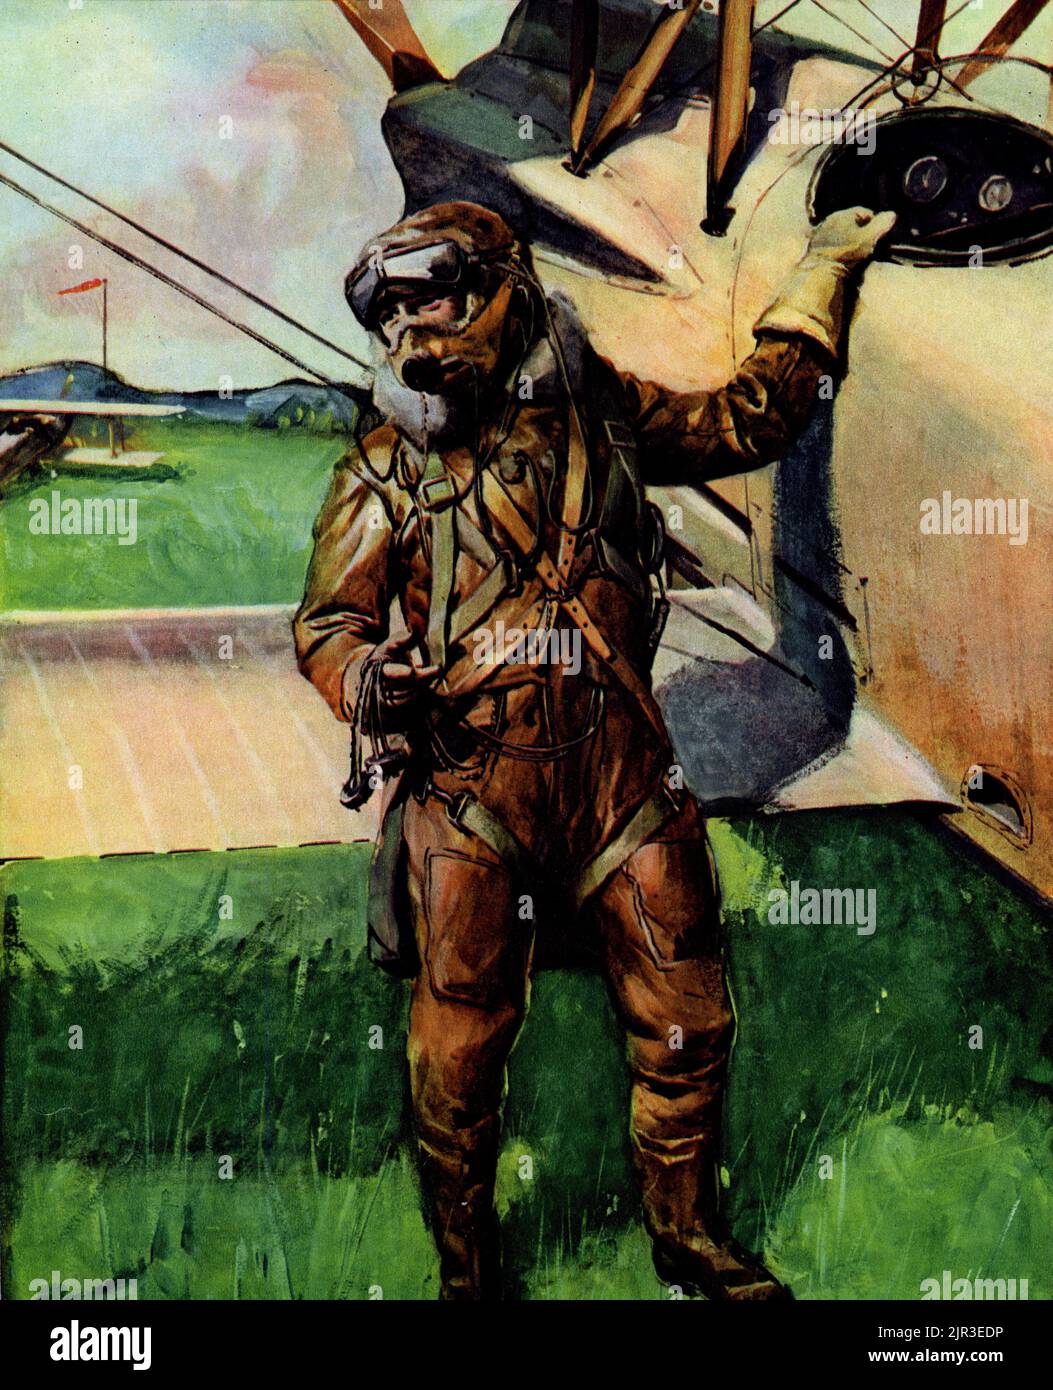 Halftone of a pilot ready to take off in a biplane during World War Two, published 1942. Stock Photo